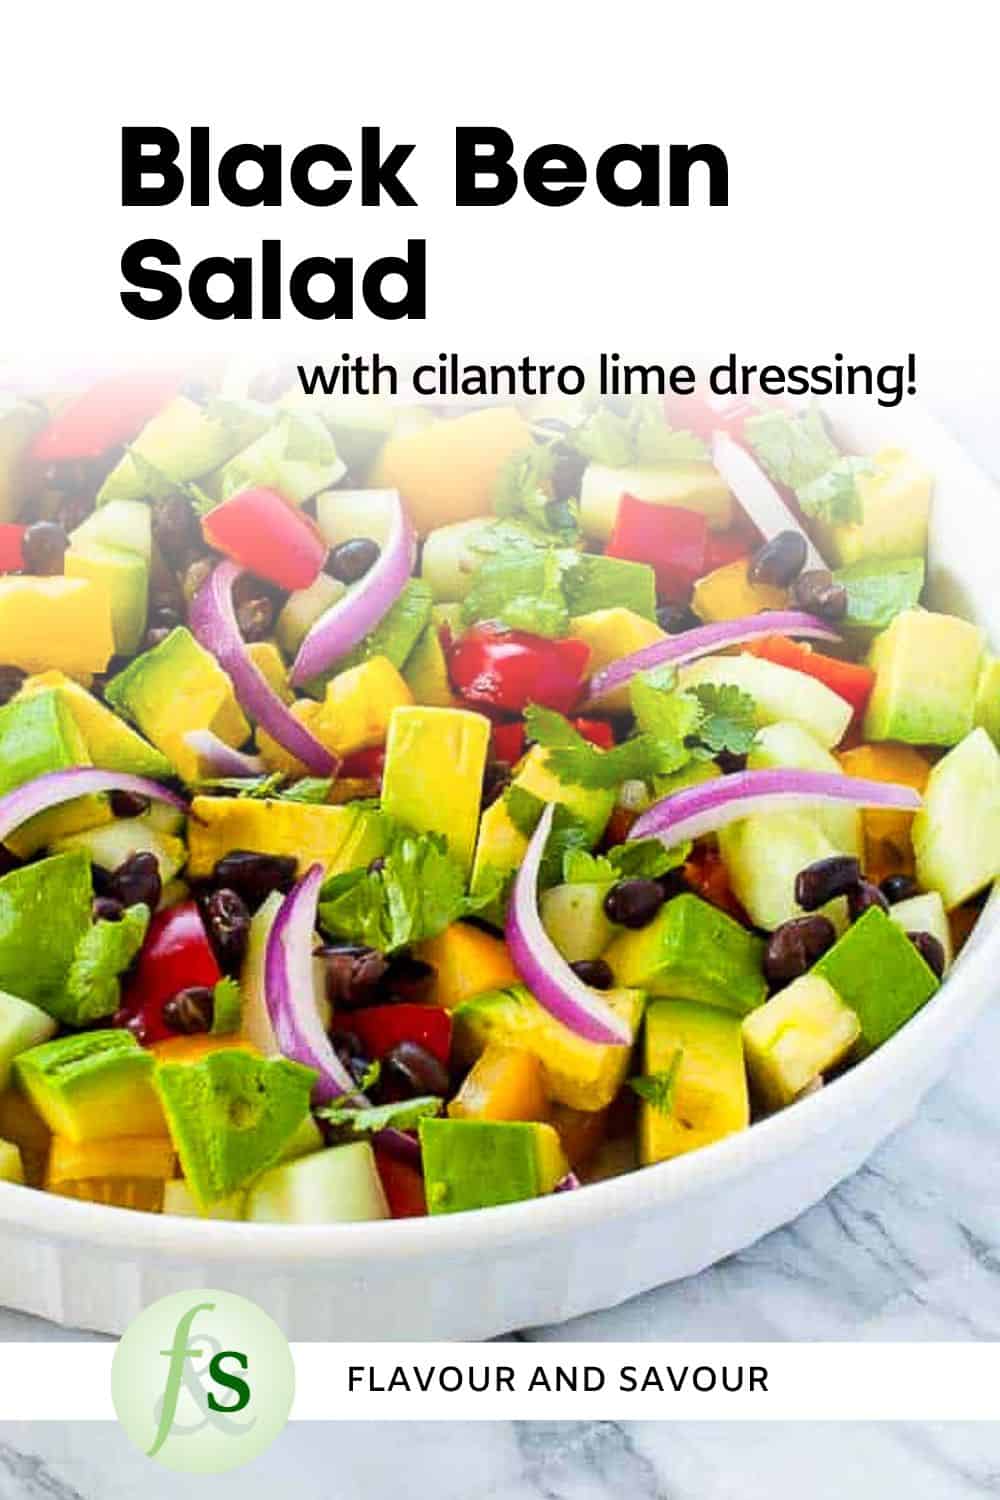 Image with text overlay for tomato avocado black bean salad.